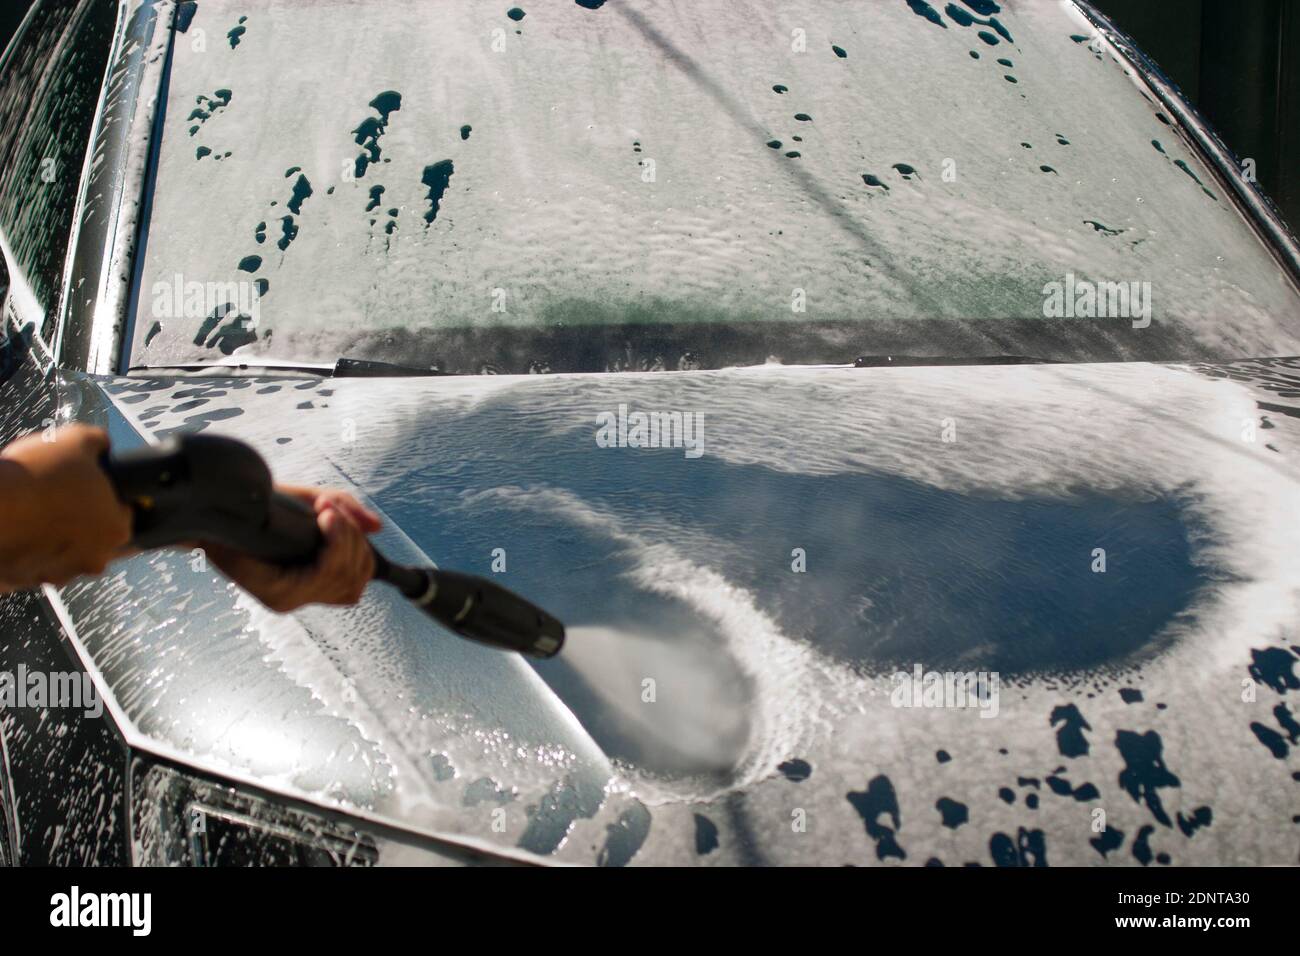 Car washing with high pressure water jet. Water and foam under pressure flies toward the car body. Close-up view Stock Photo